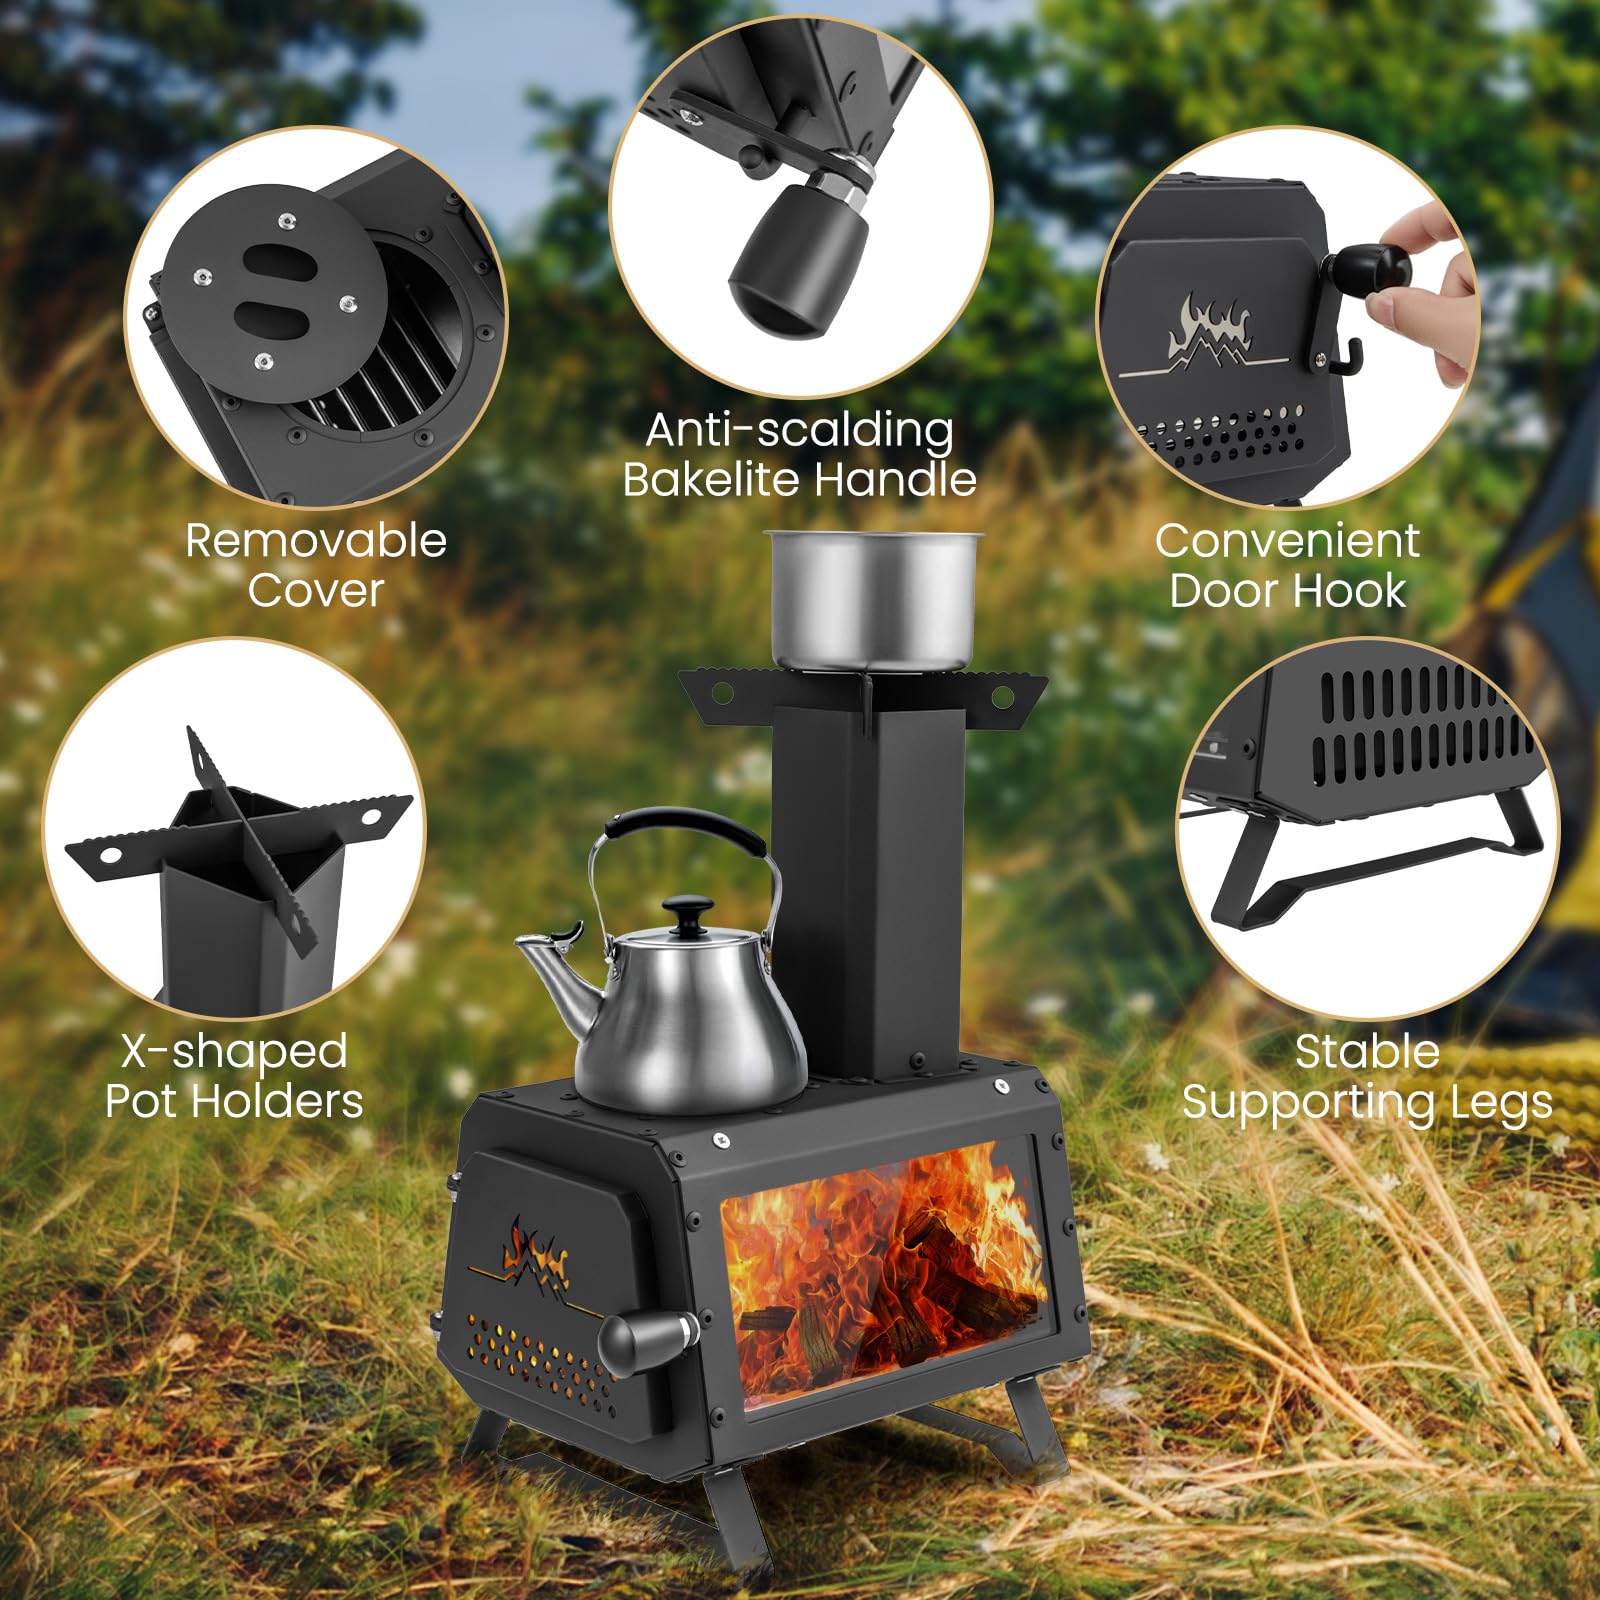 Giantex Portable Camping Wood Stove - Mini Wood Burning Stove w/ 2 Cooking Positions